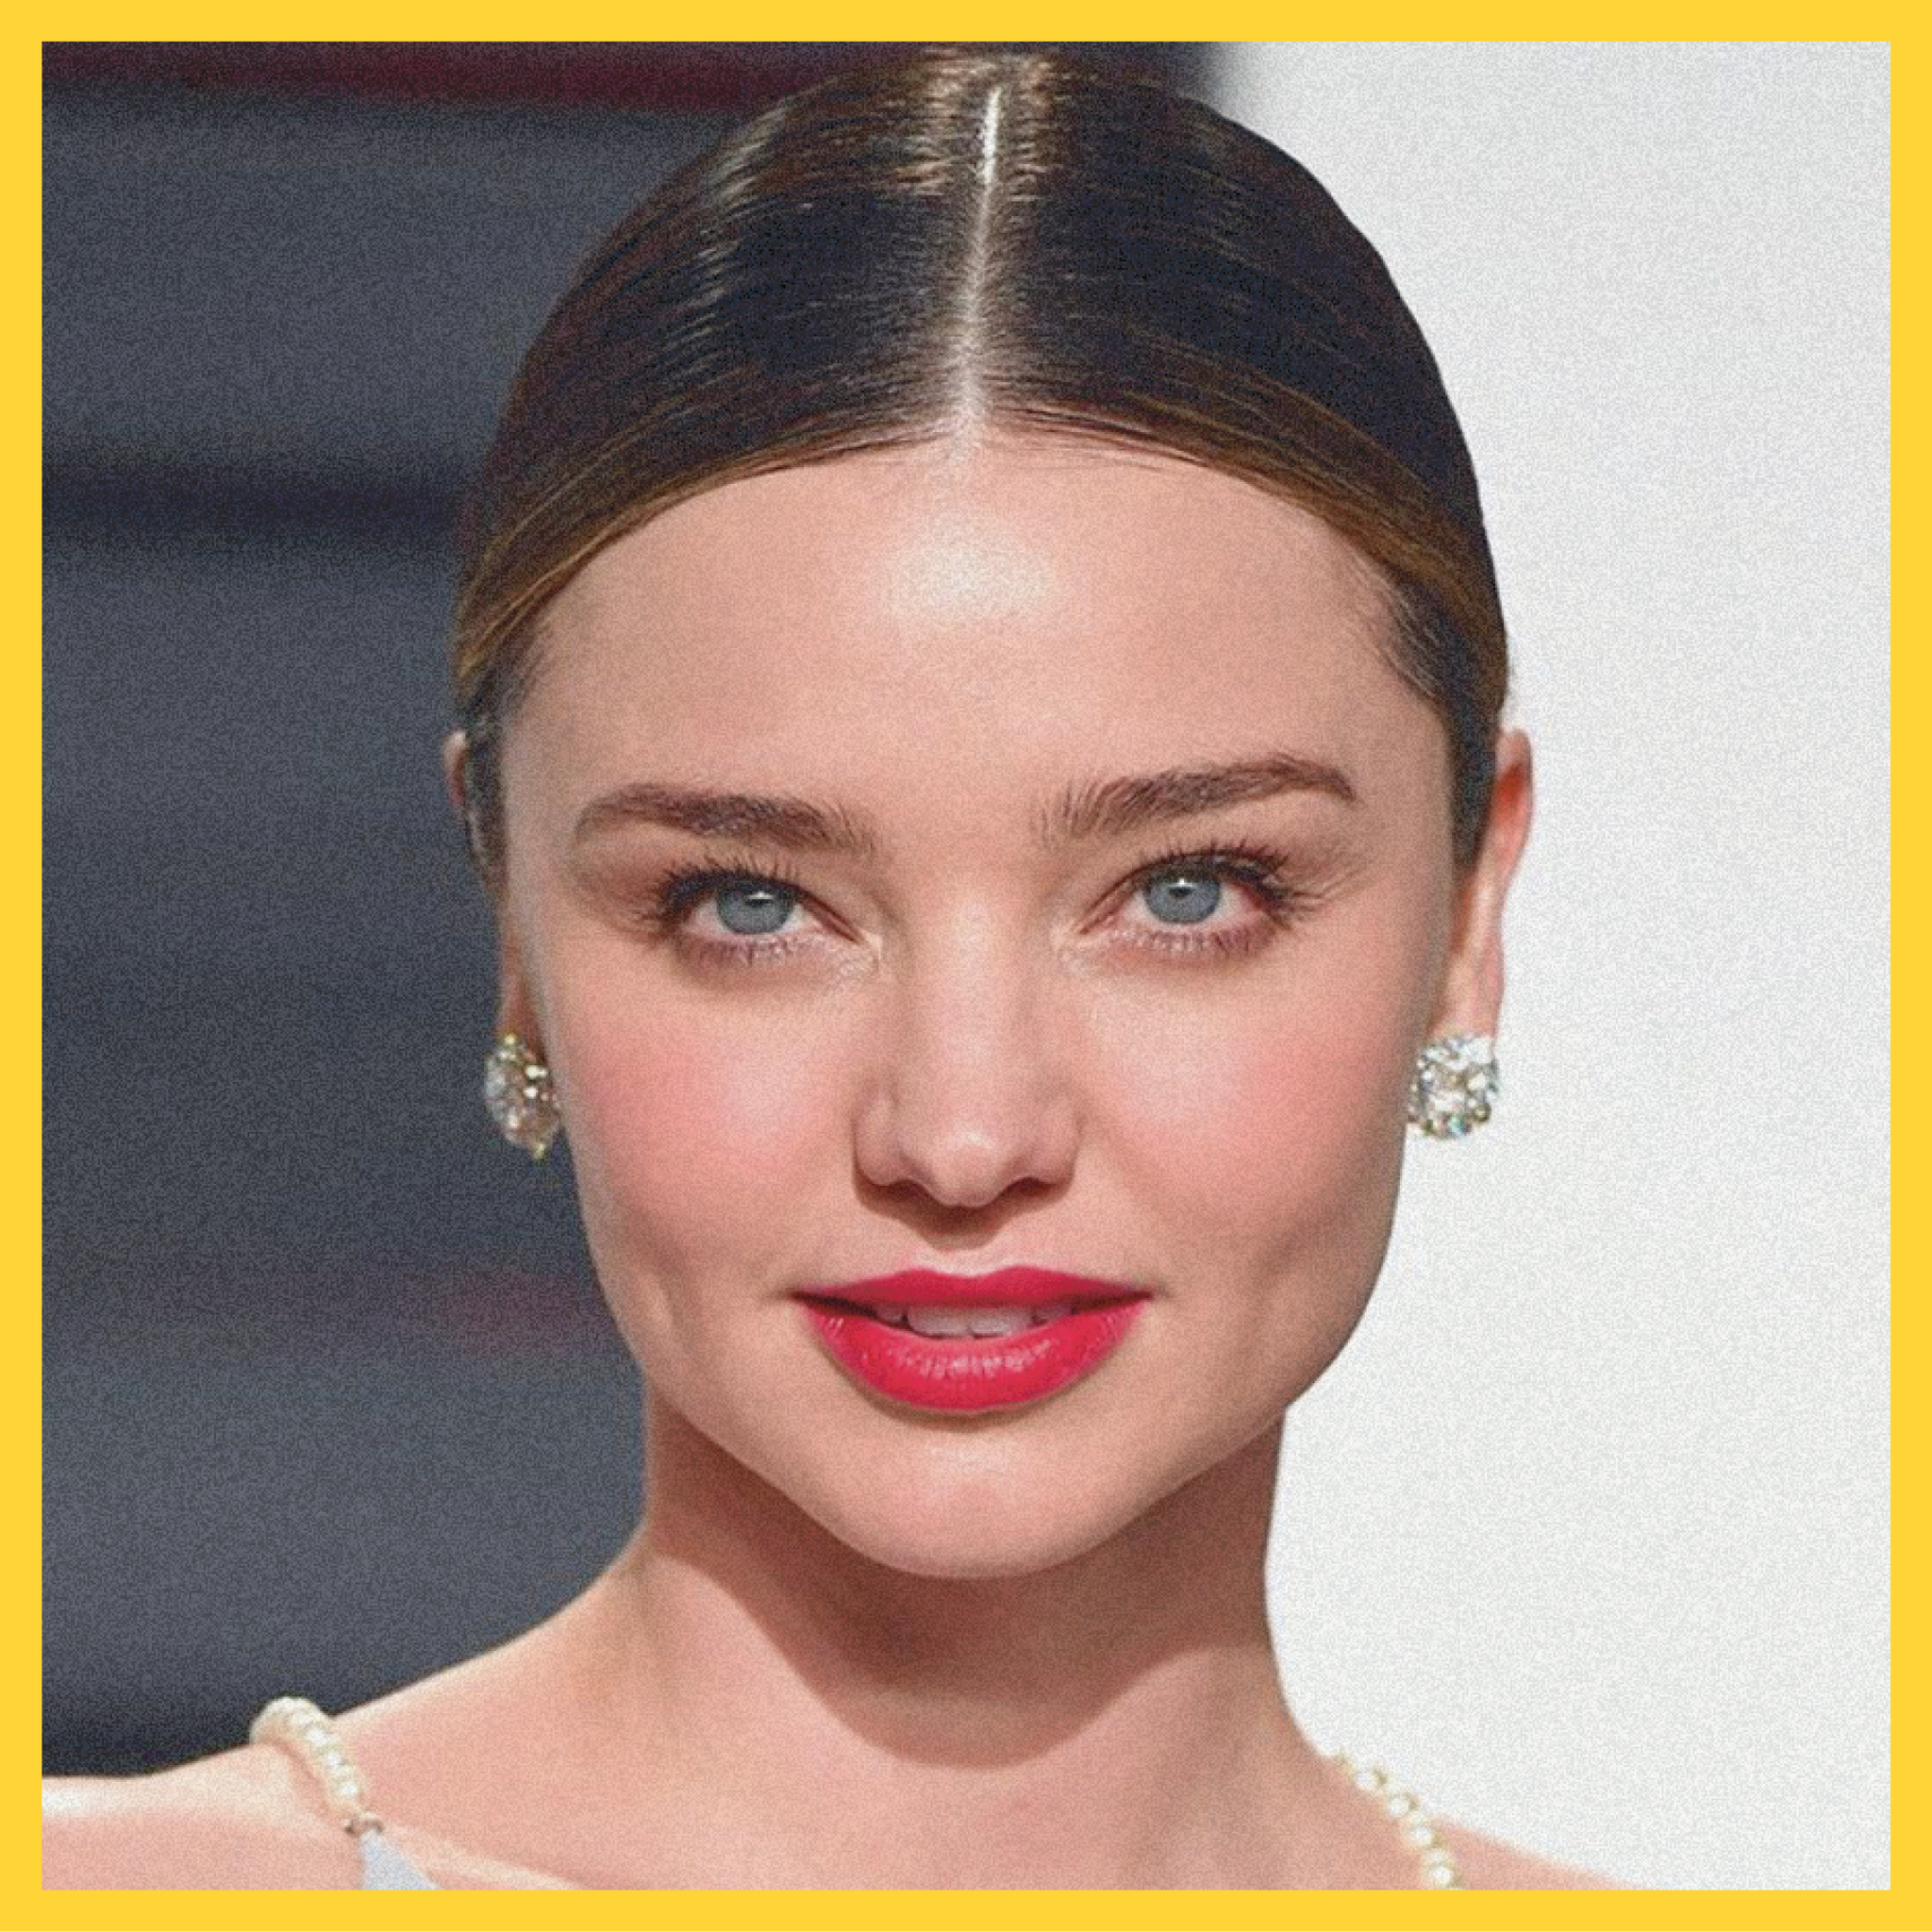 Miranda Kerr swears by this incredible foundation for covering